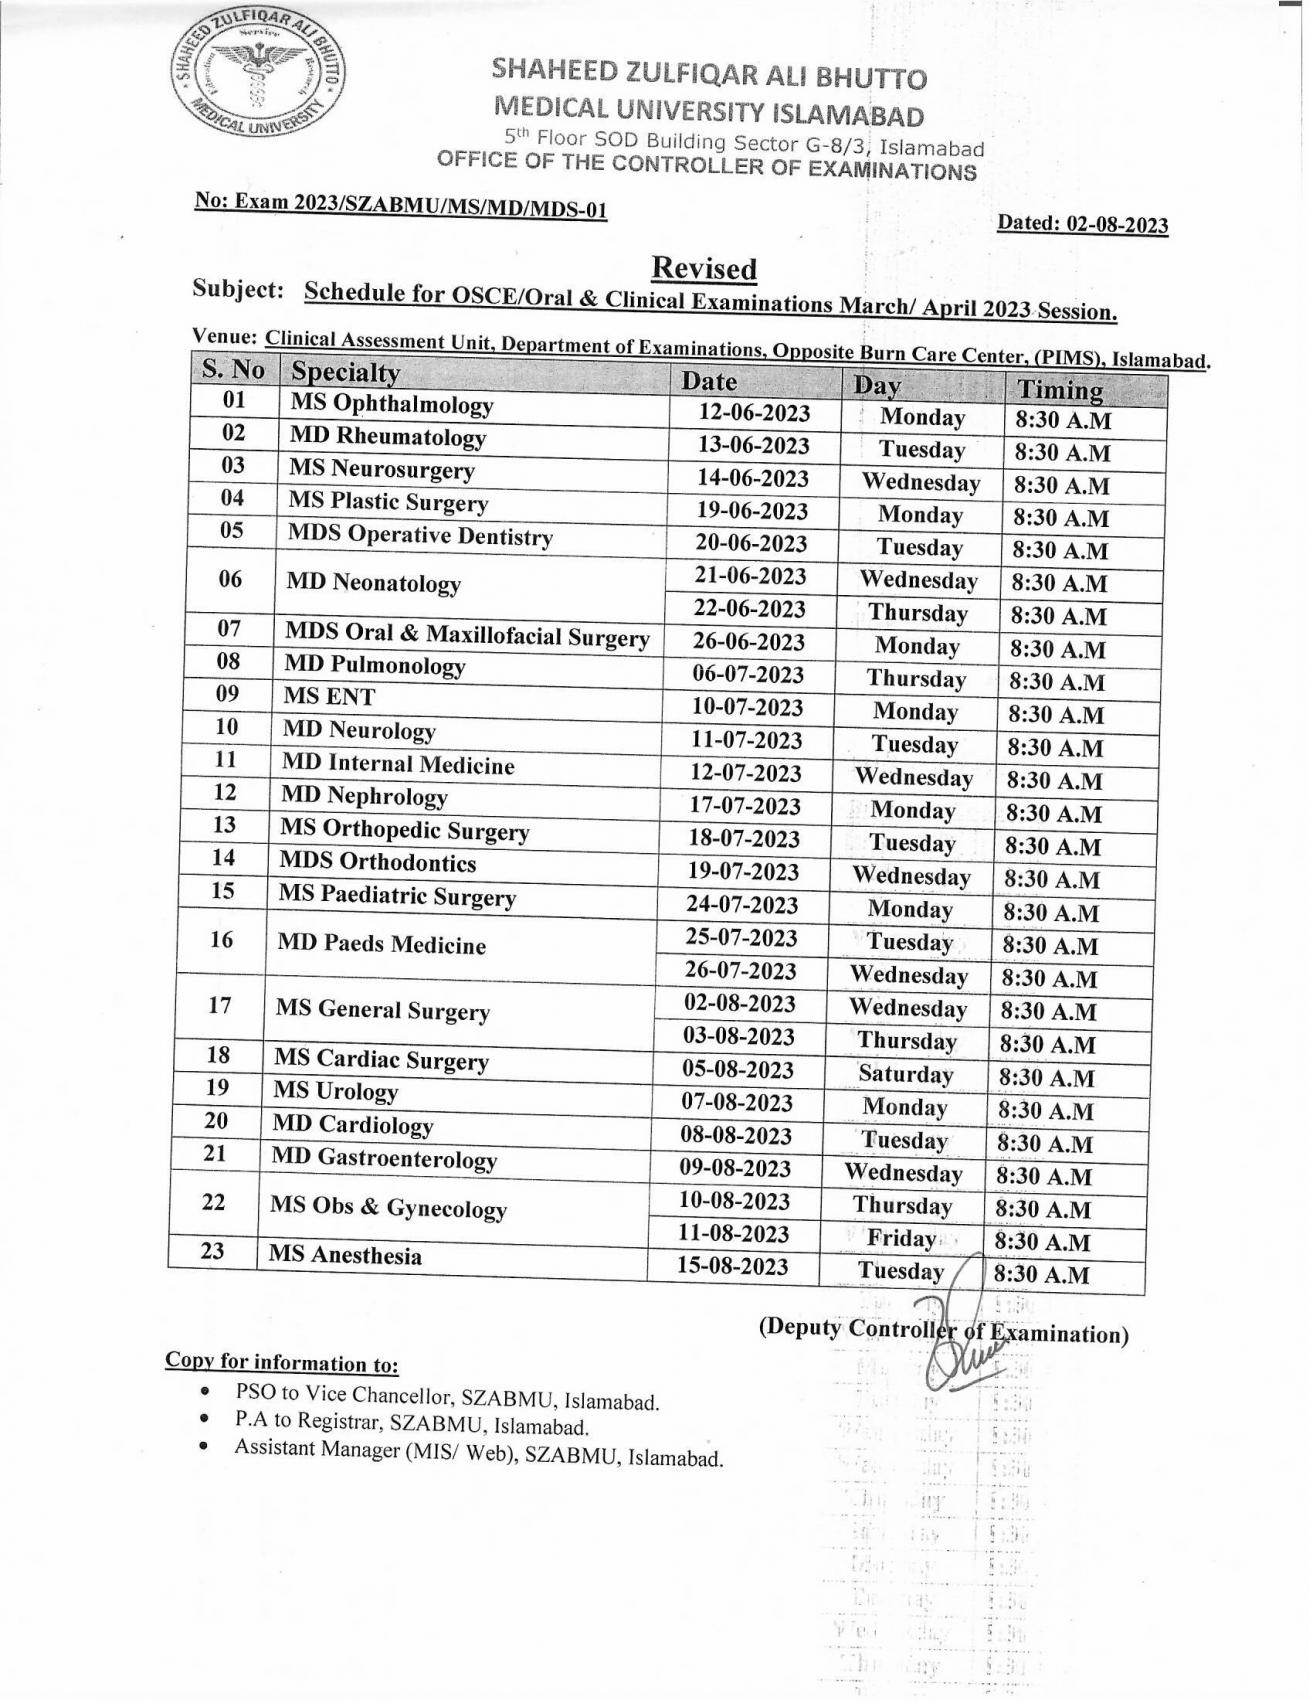 Revised - Schedule for OSCE/Oral & Clinical Examination March/April Session 2023